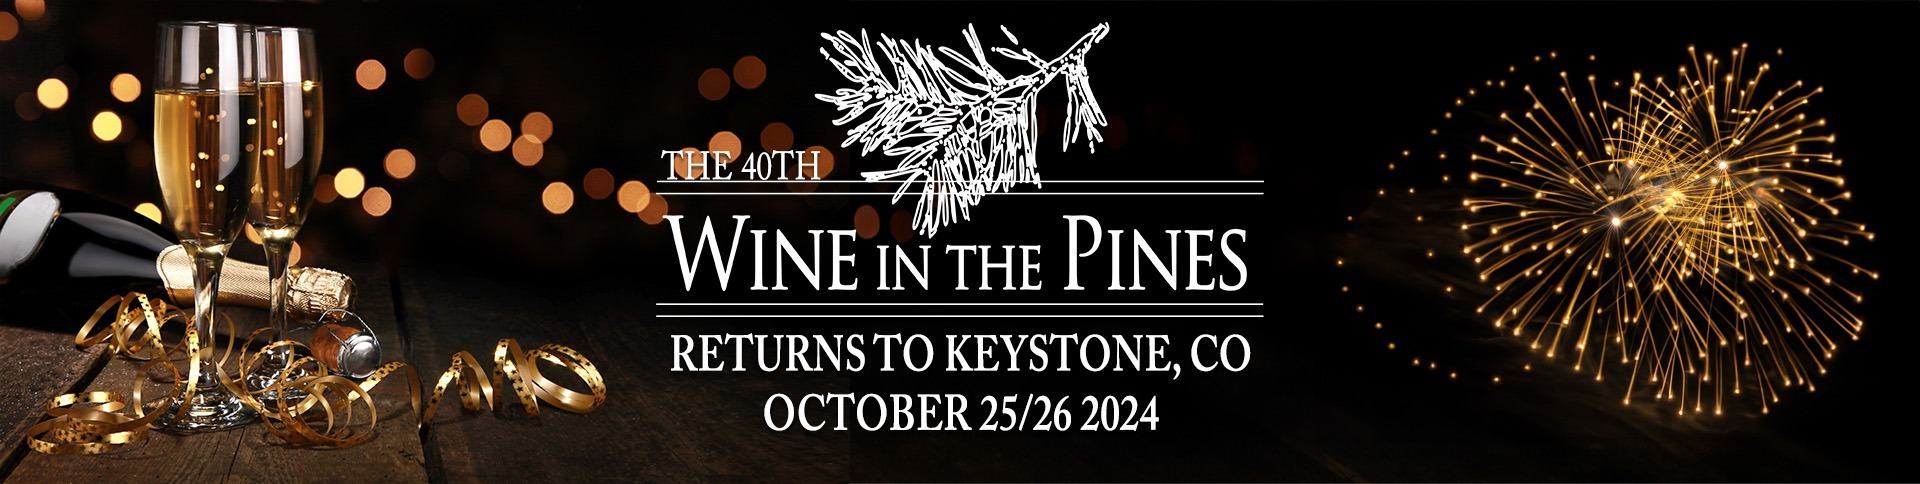 38th Annual Wine in the Pines